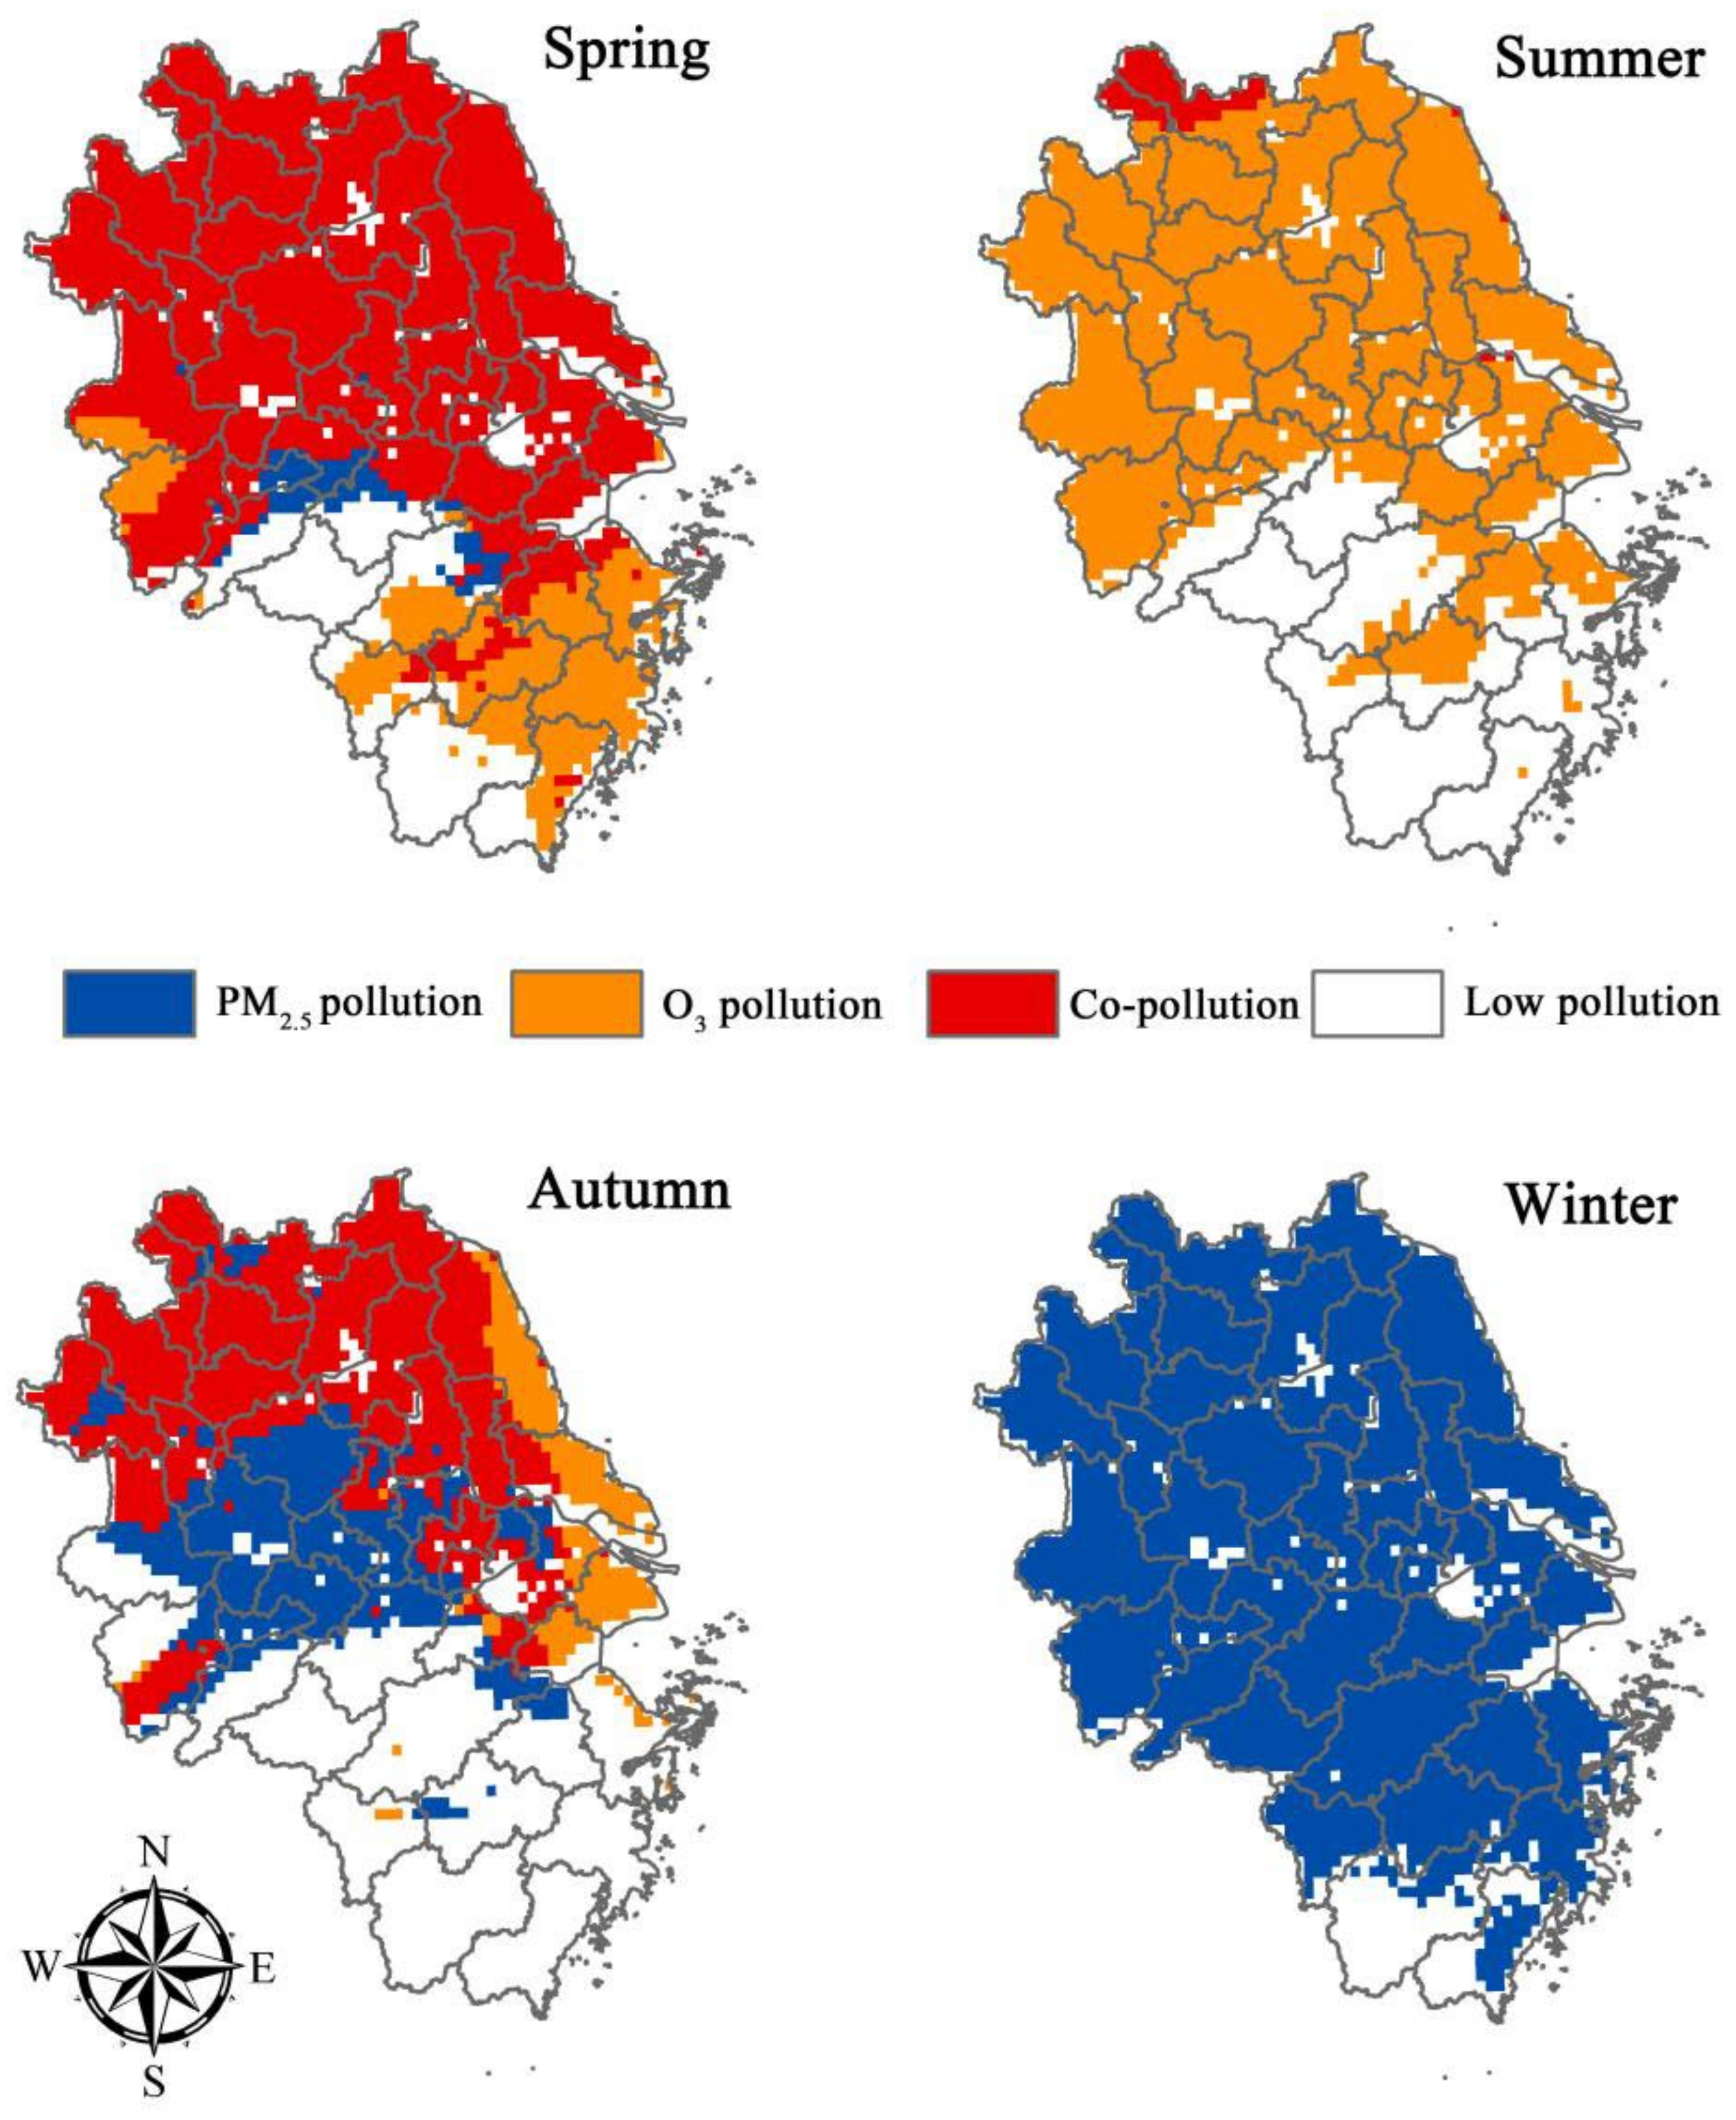 Atmosphere | Free Full-Text | Demarcation of Coordinated Prevention and  Control Regions in the Yangtze River Delta Based on Spatio-Temporal  Variations in PM2.5 and O3 Concentrations | HTML